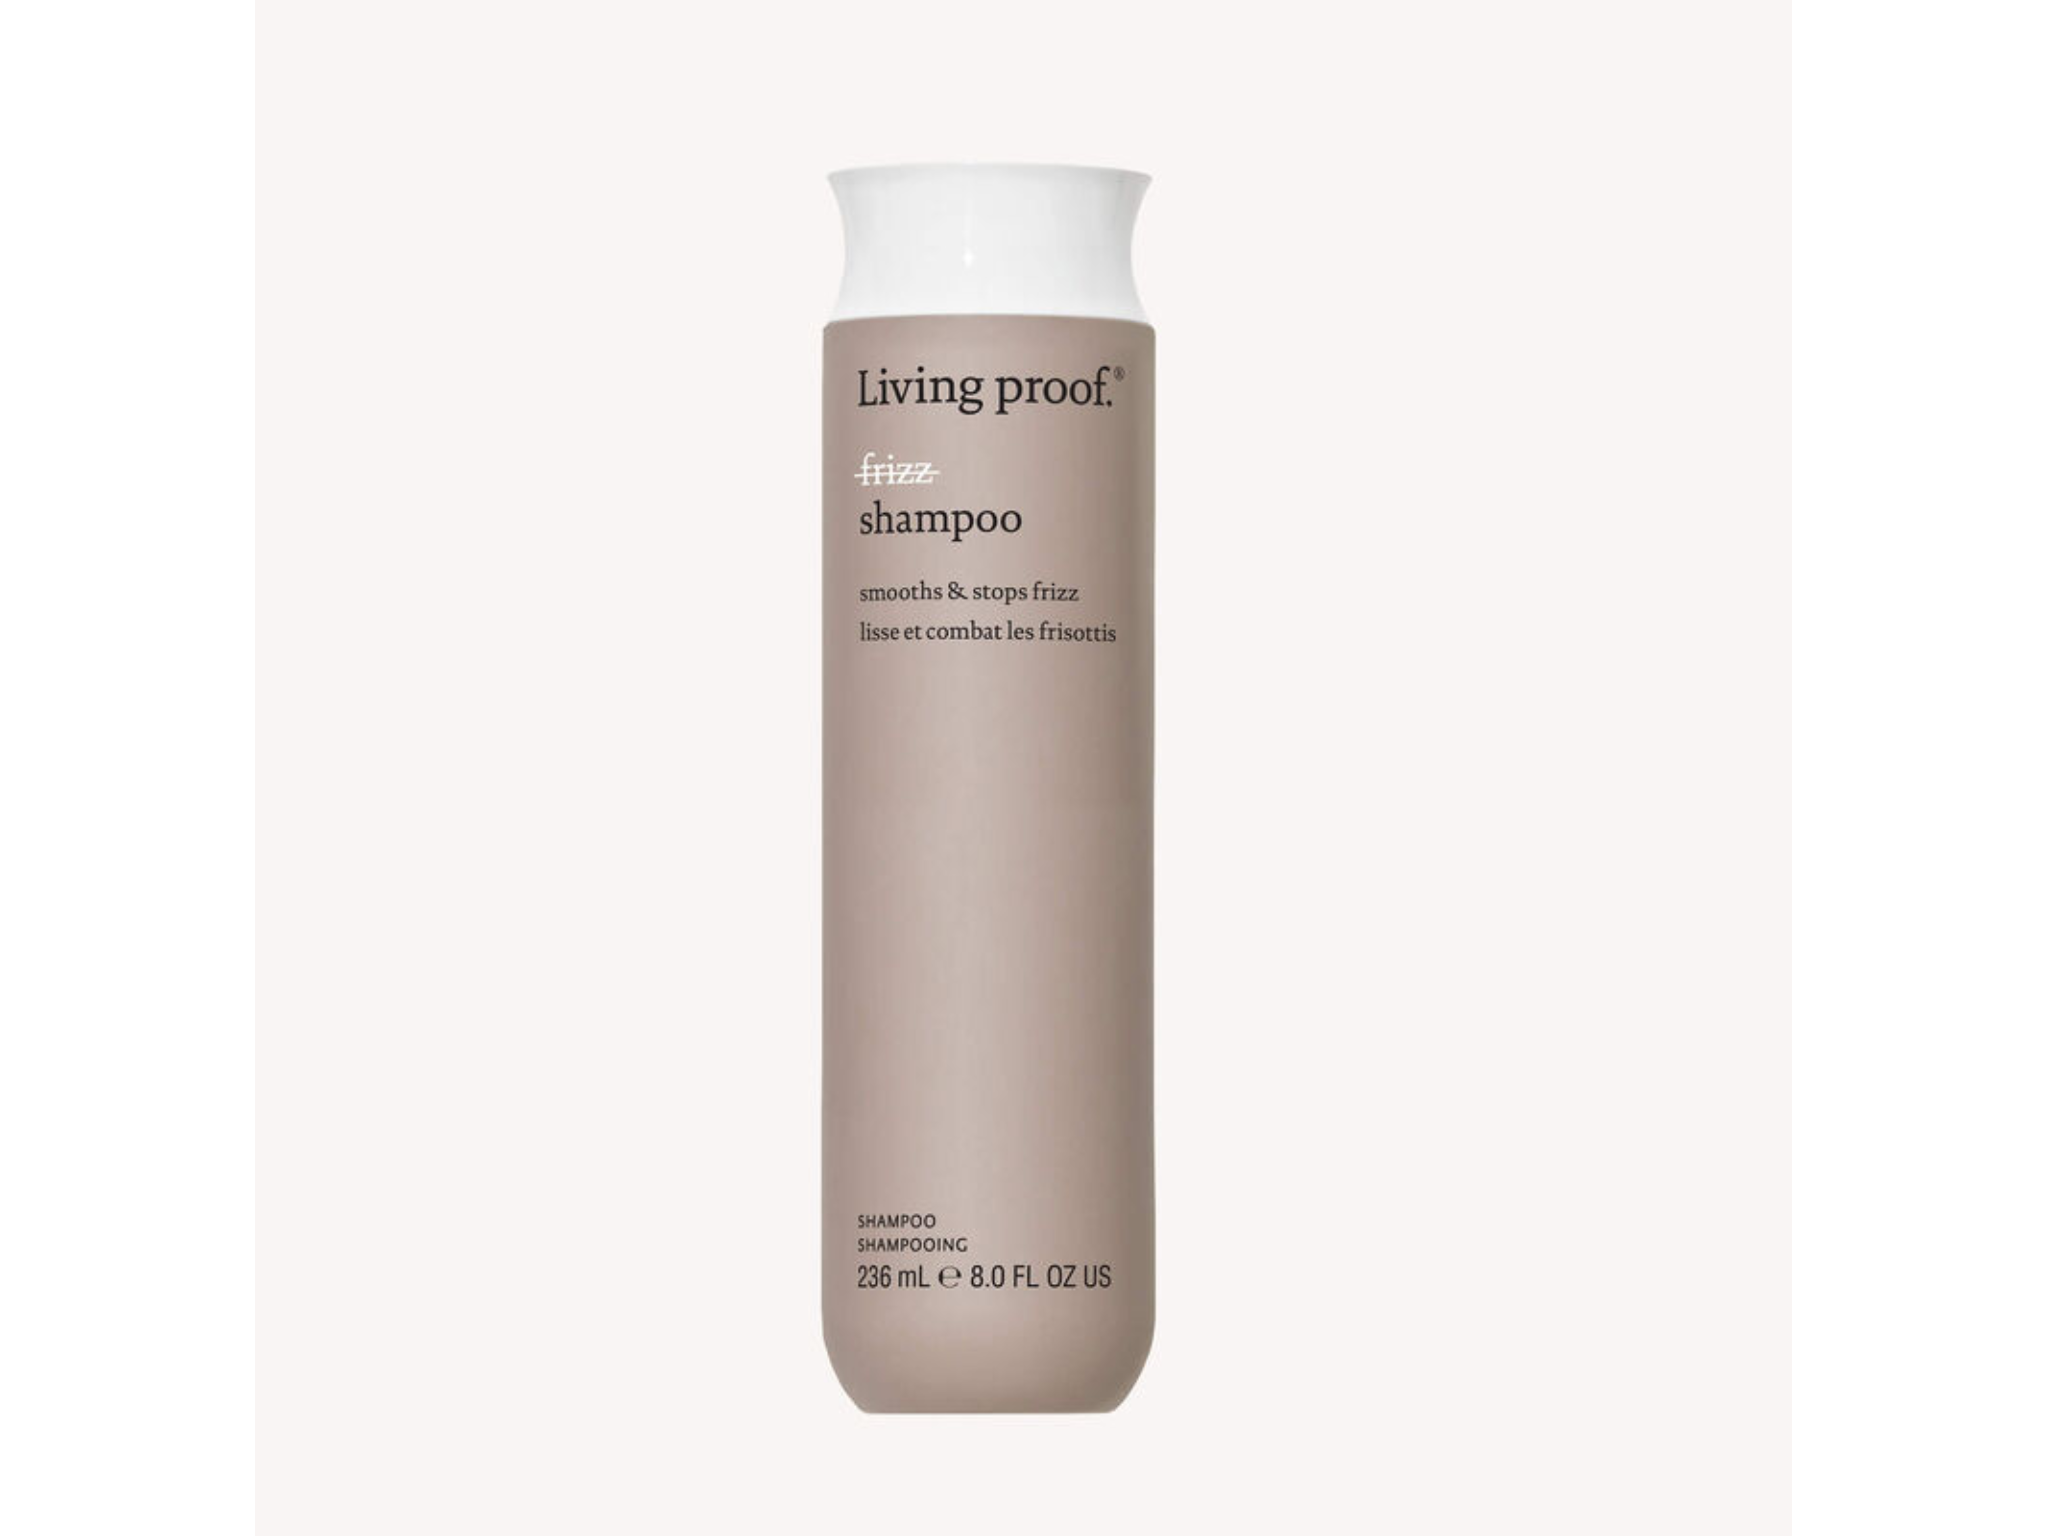 Living-proof-sulphate-free-shampoo-indybest